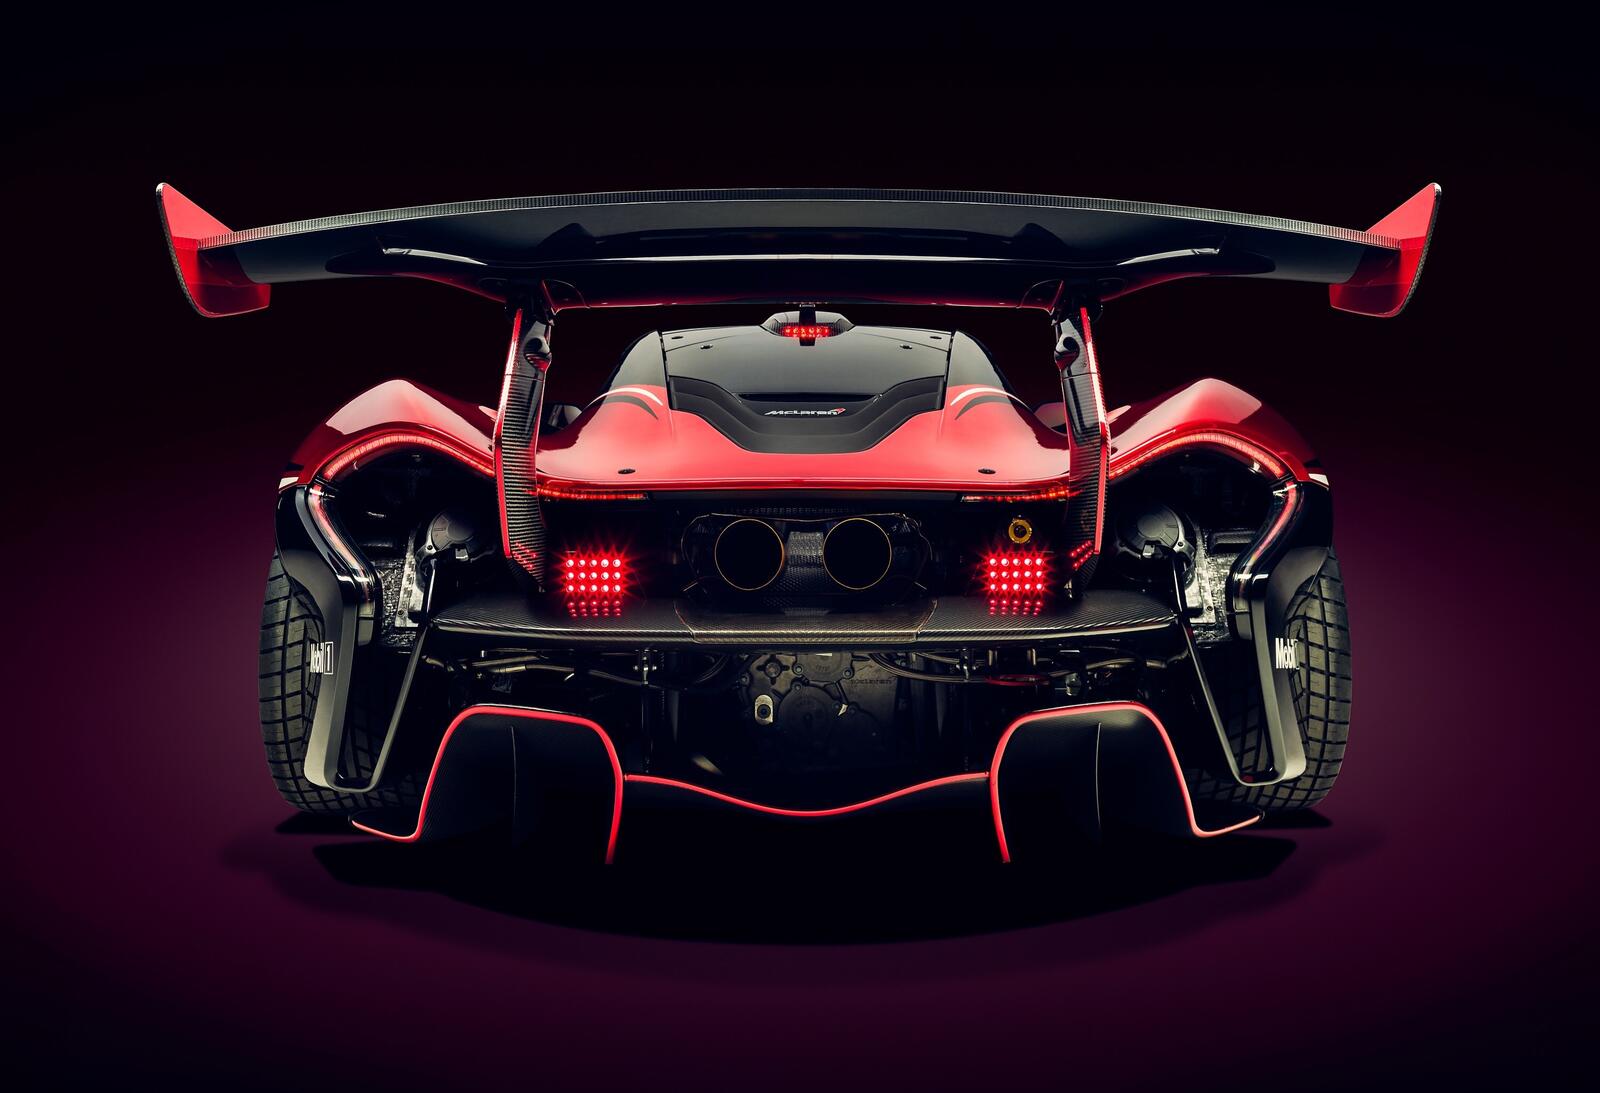 Wallpapers Mclaren P1 cars view from behind on the desktop